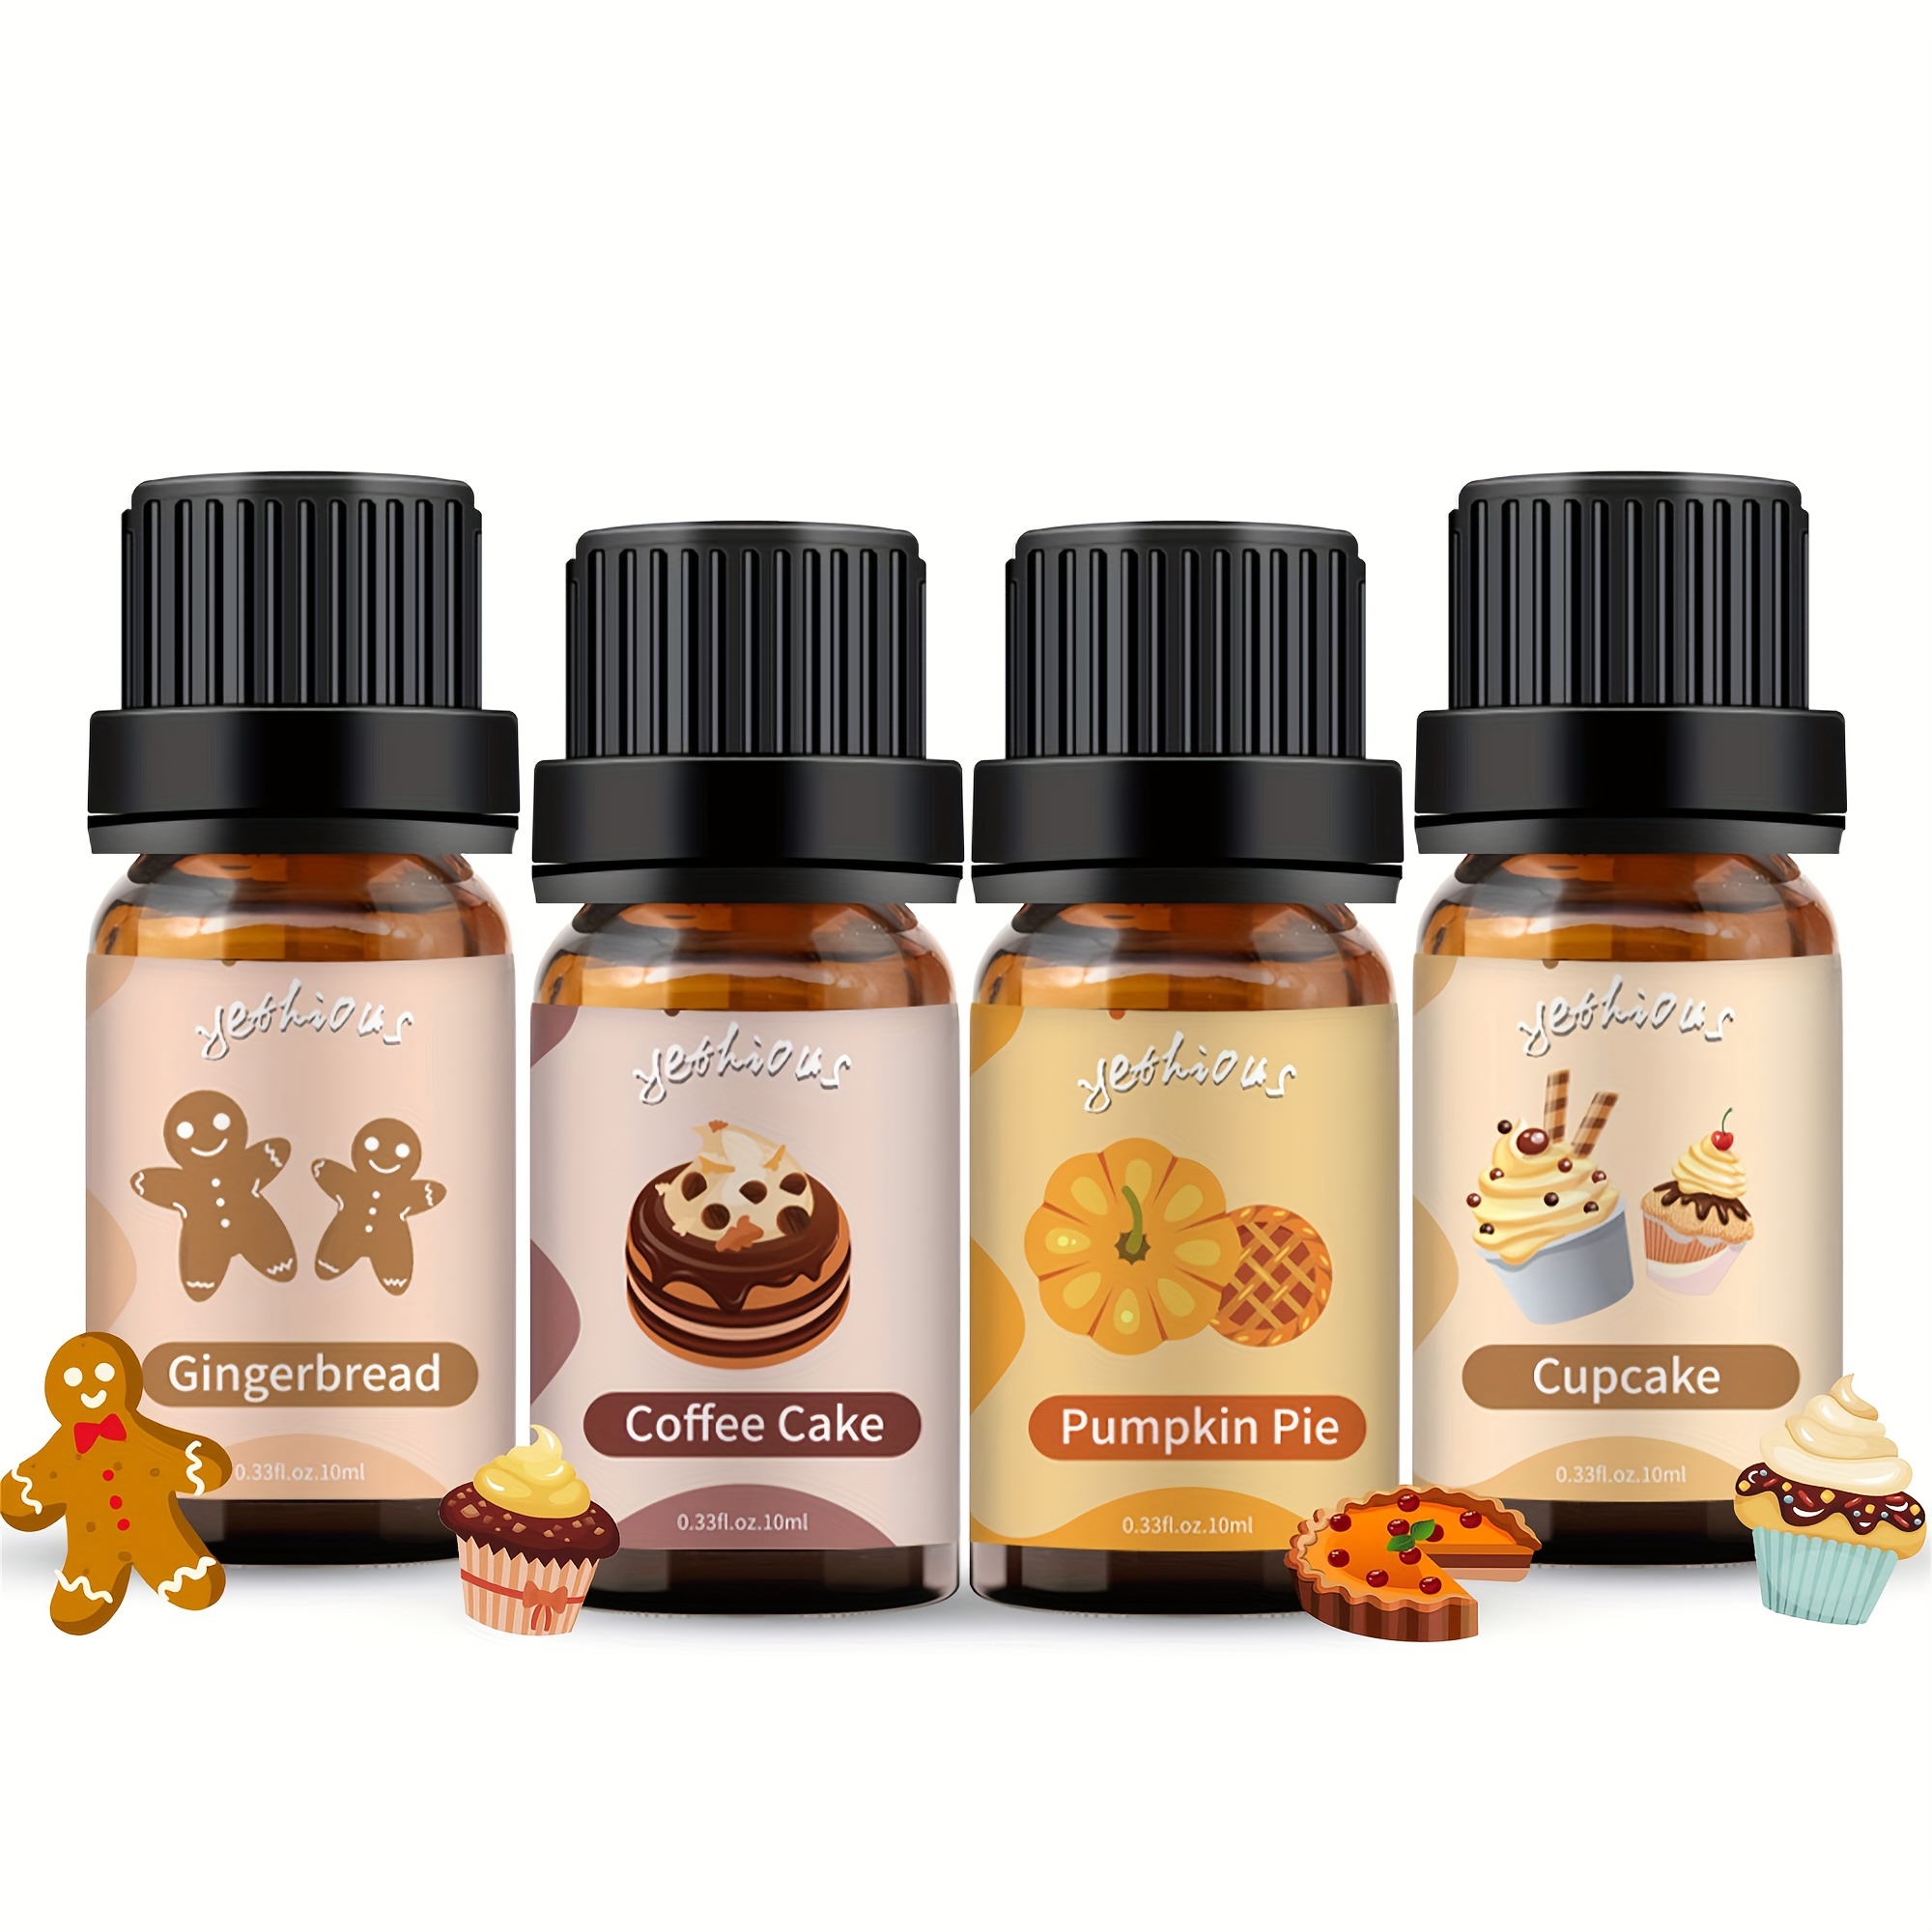 1pc 0.33oz Christmas Food Scent Oil Cupcake Fragrance Oil, Essential Oil  For Diffuser, Humidifier, Candle Making, Soap Scents, Christmas Gifts